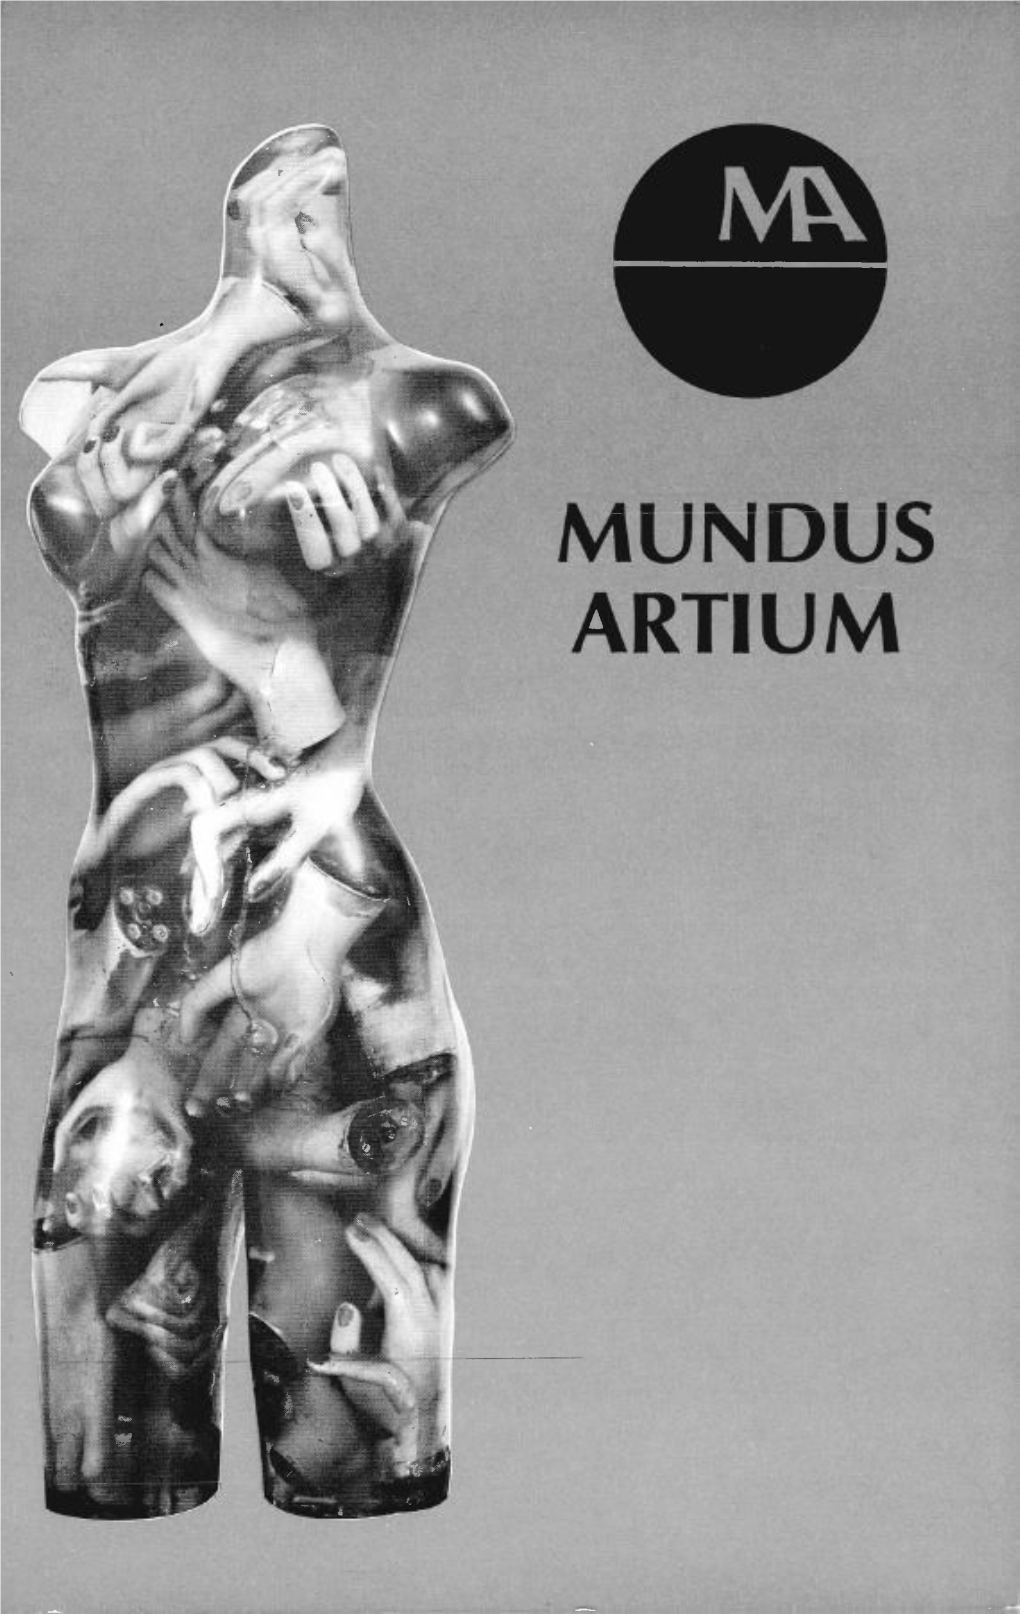 MUNDUS ARTIUM a Journal of International Literature and the Arts 1972, Volume V, Number 3 STAFF Editor-In-Chief, Rainer Schulte Associate Editor, Roma A